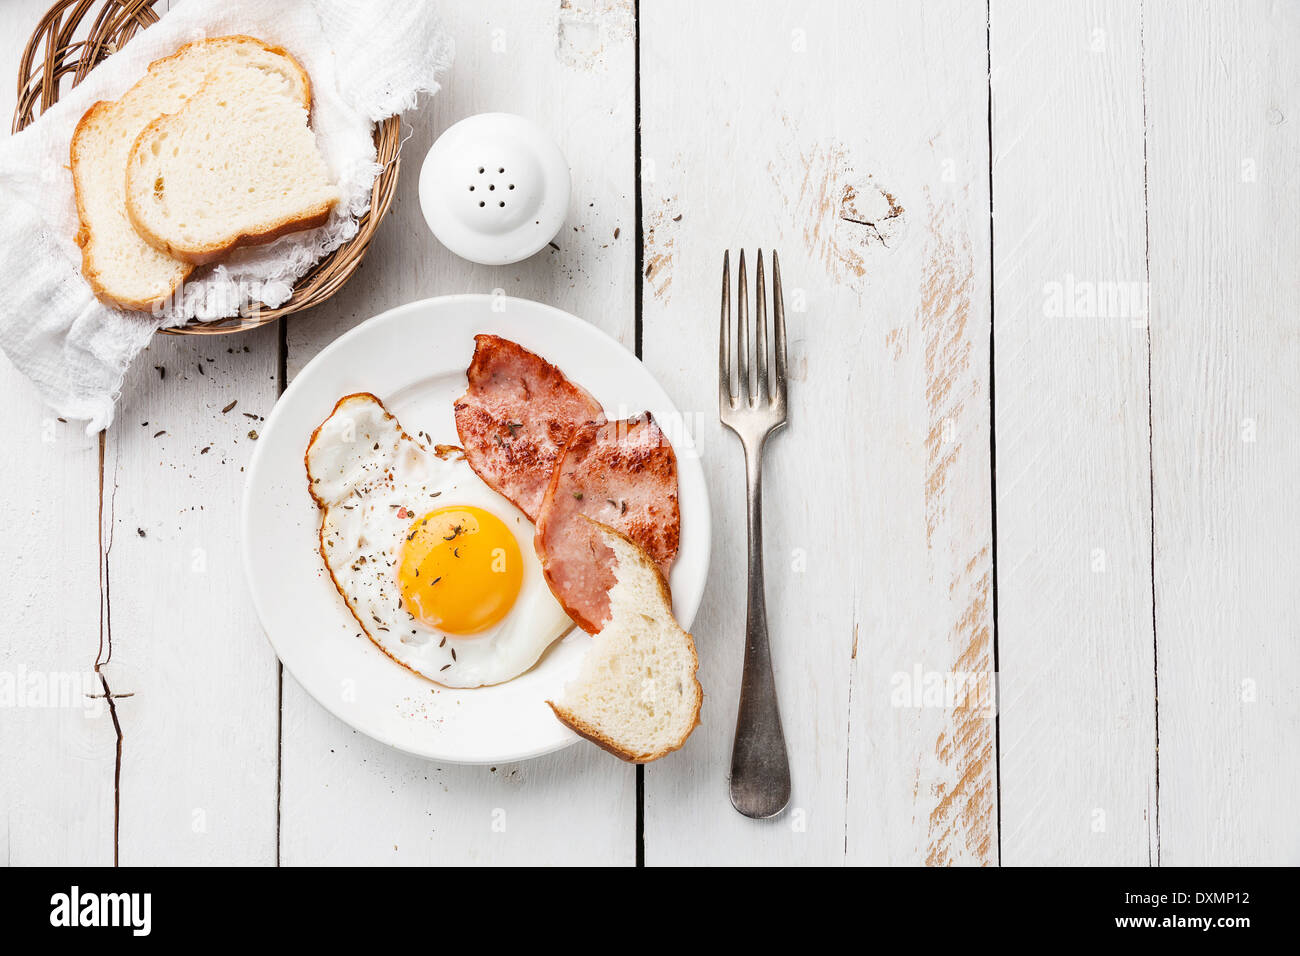 Fried egg with grilled sausage for breakfast Stock Photo